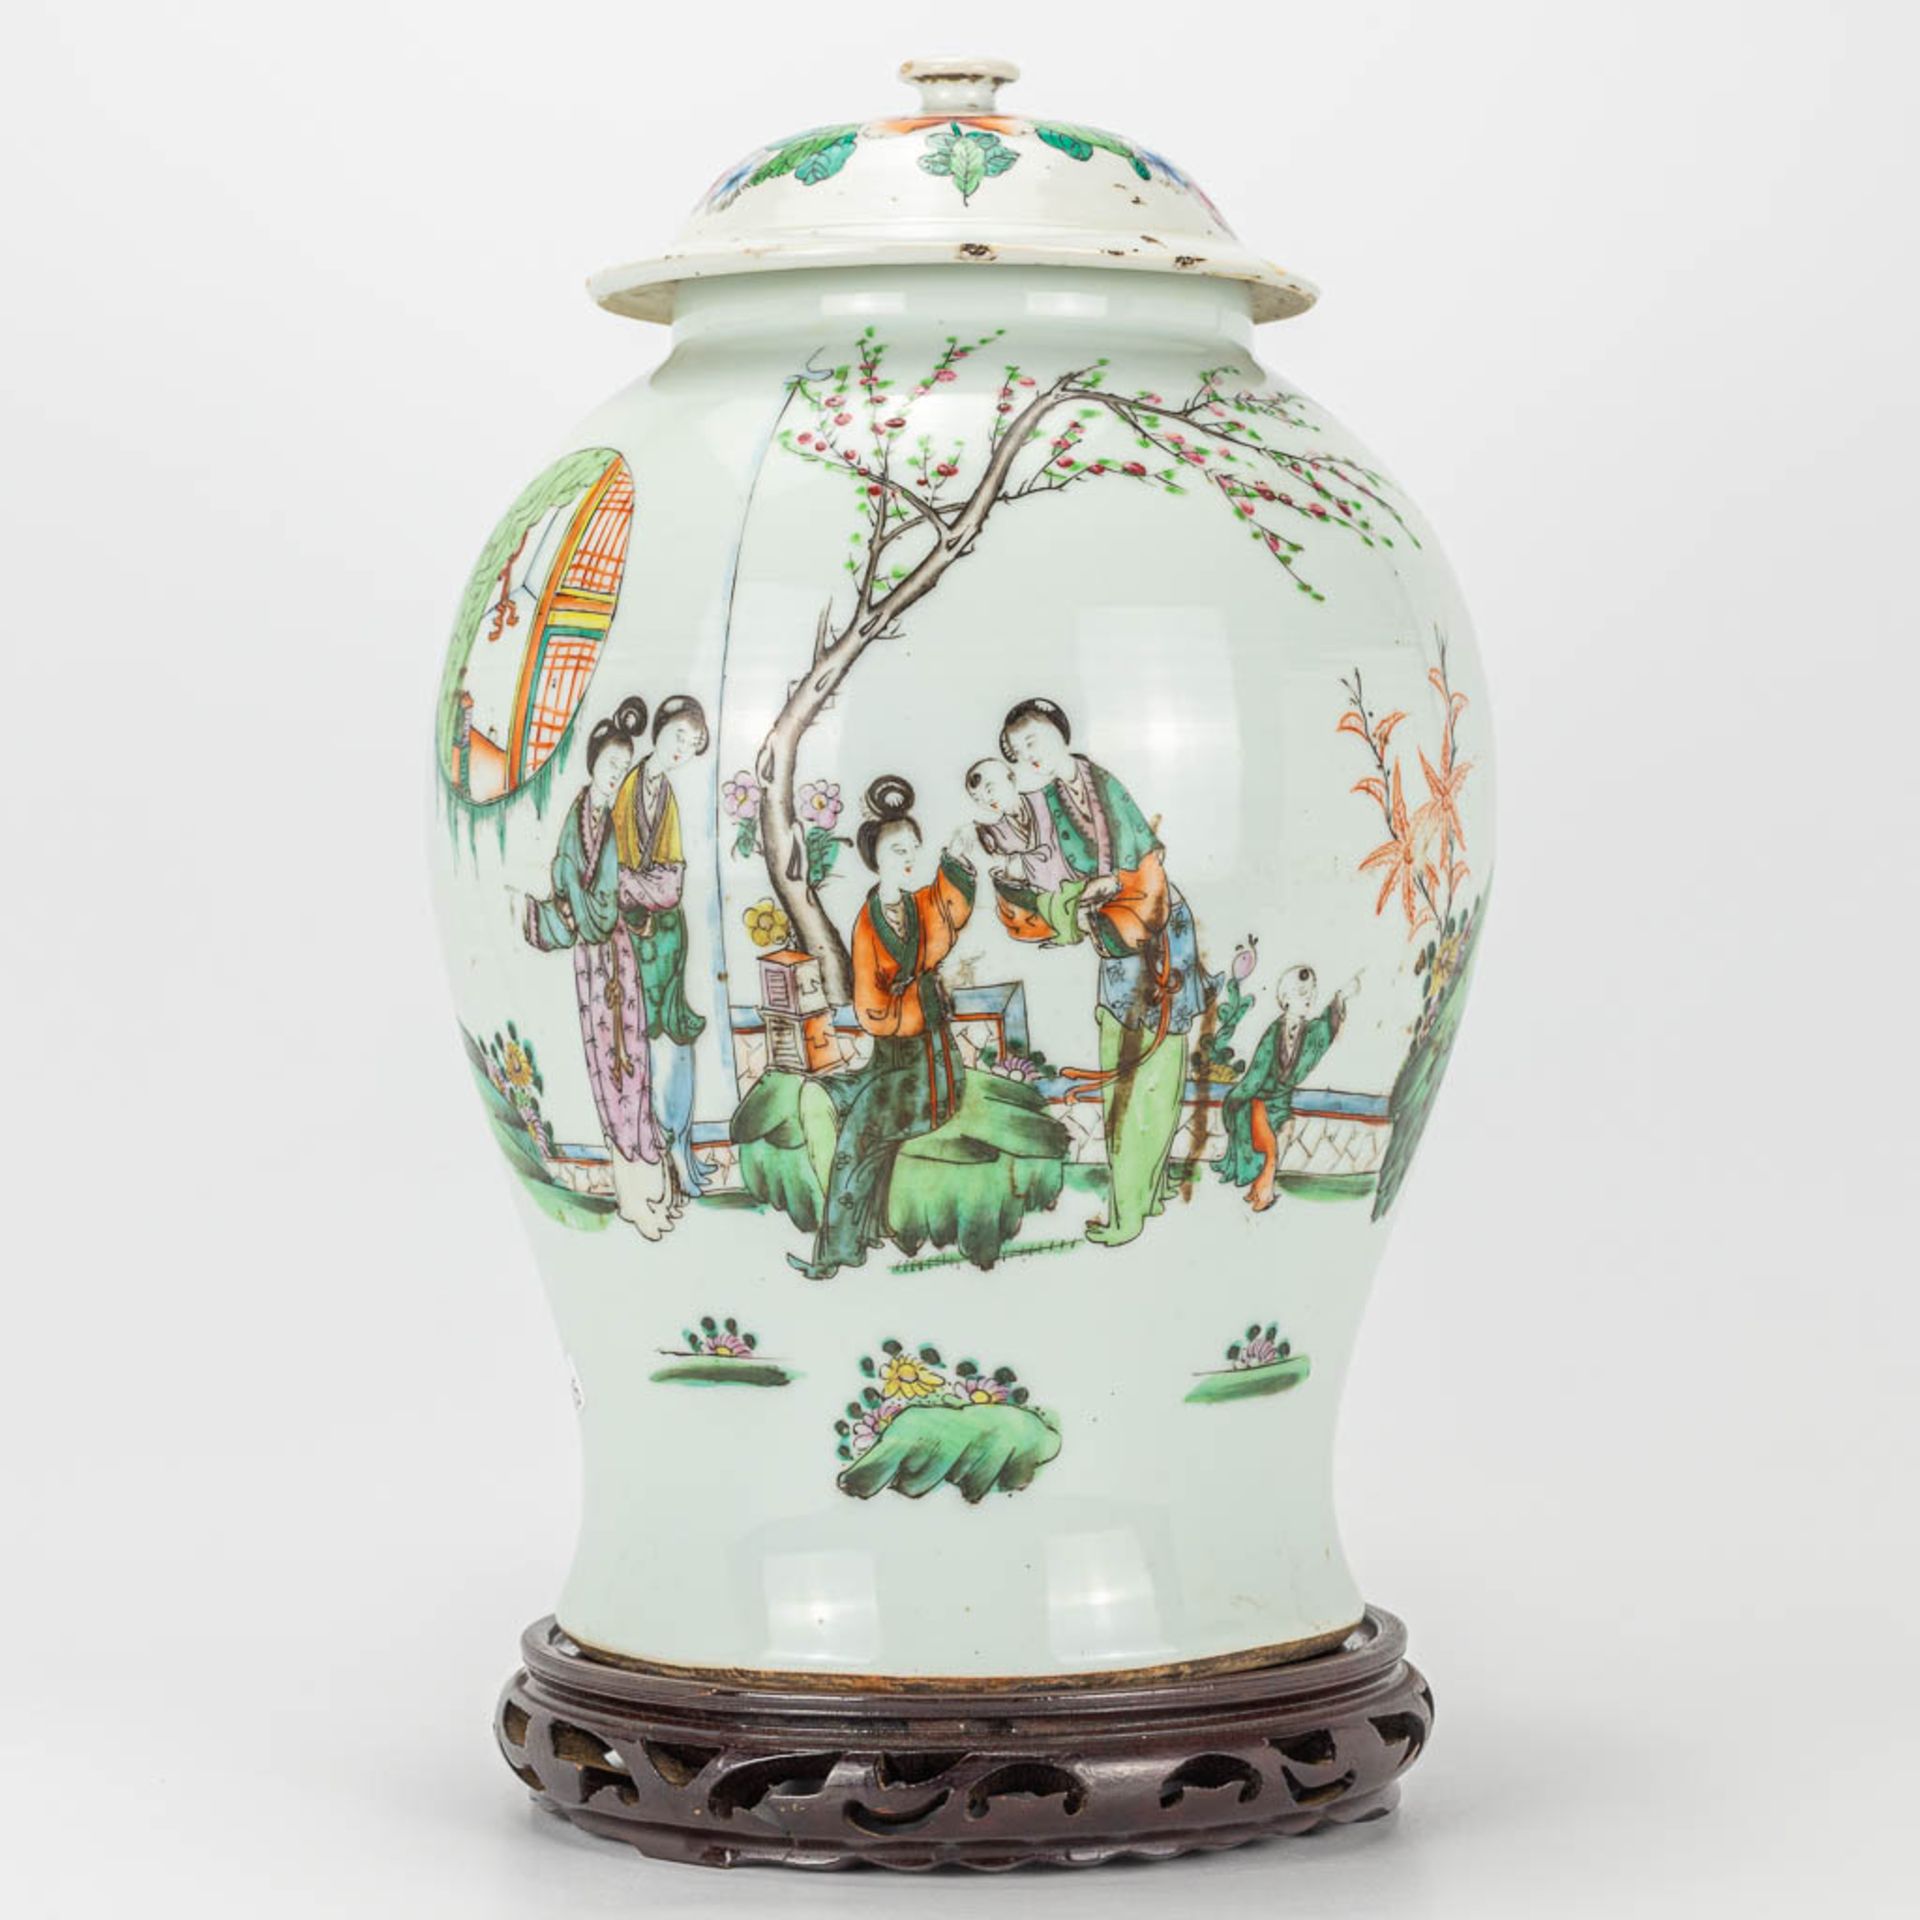 A vase with lid made of Chinese porcelain and decorated with ladies in the garden with a child